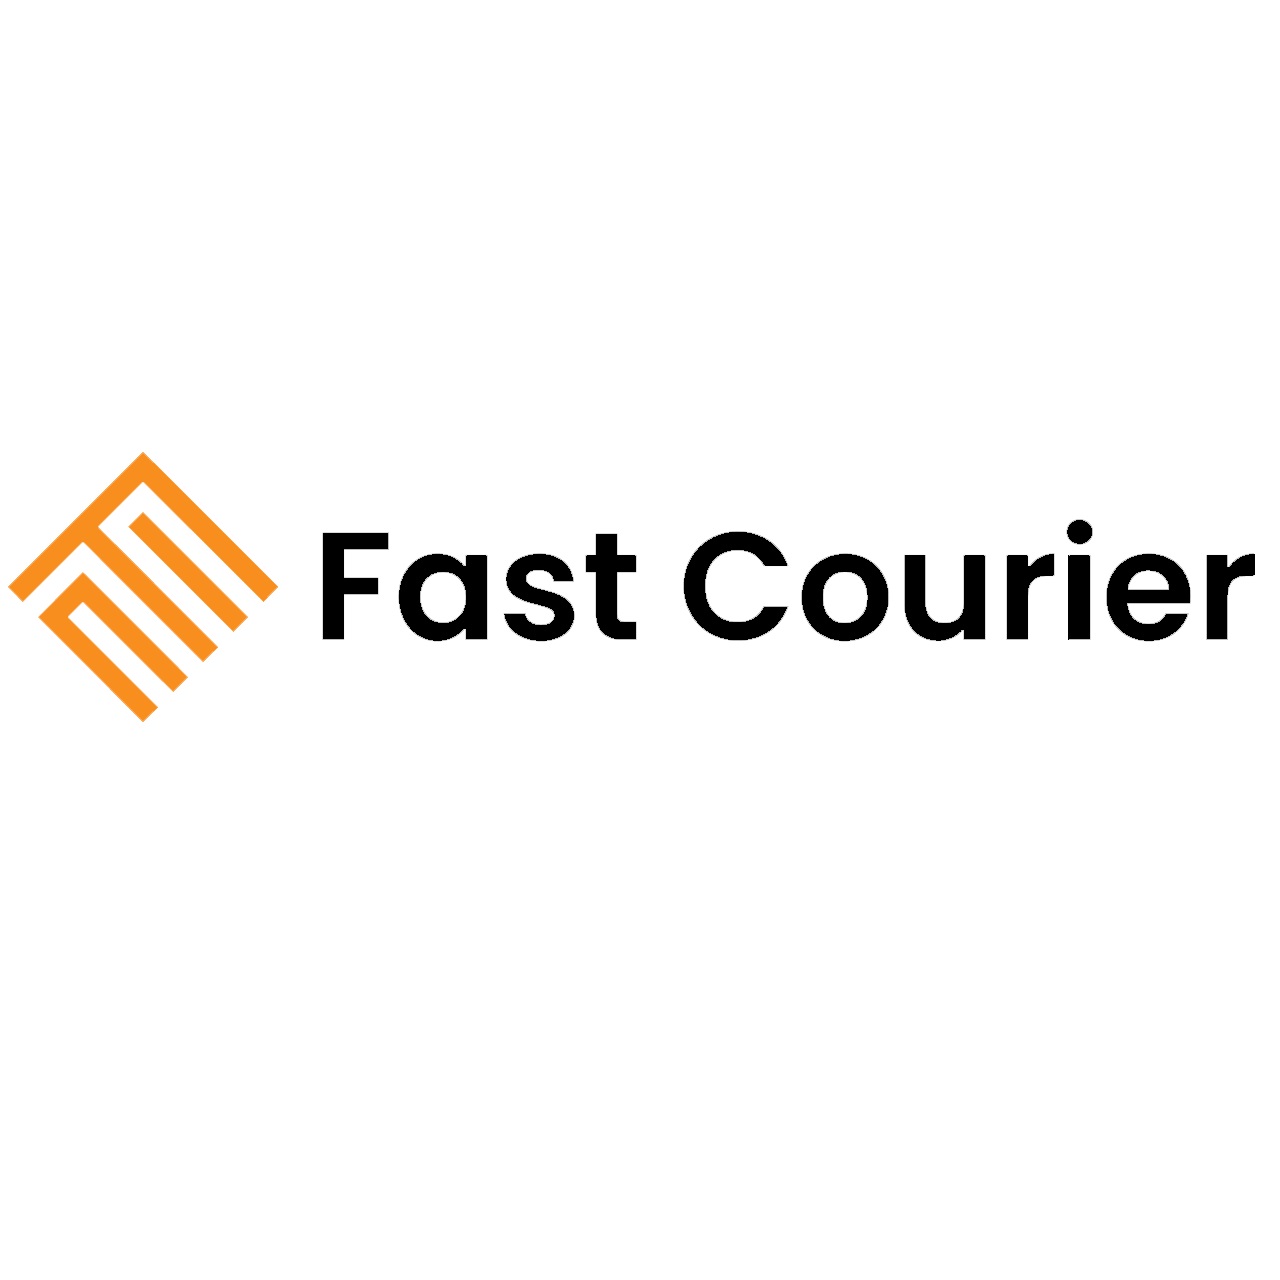 Fast Courier - Logo